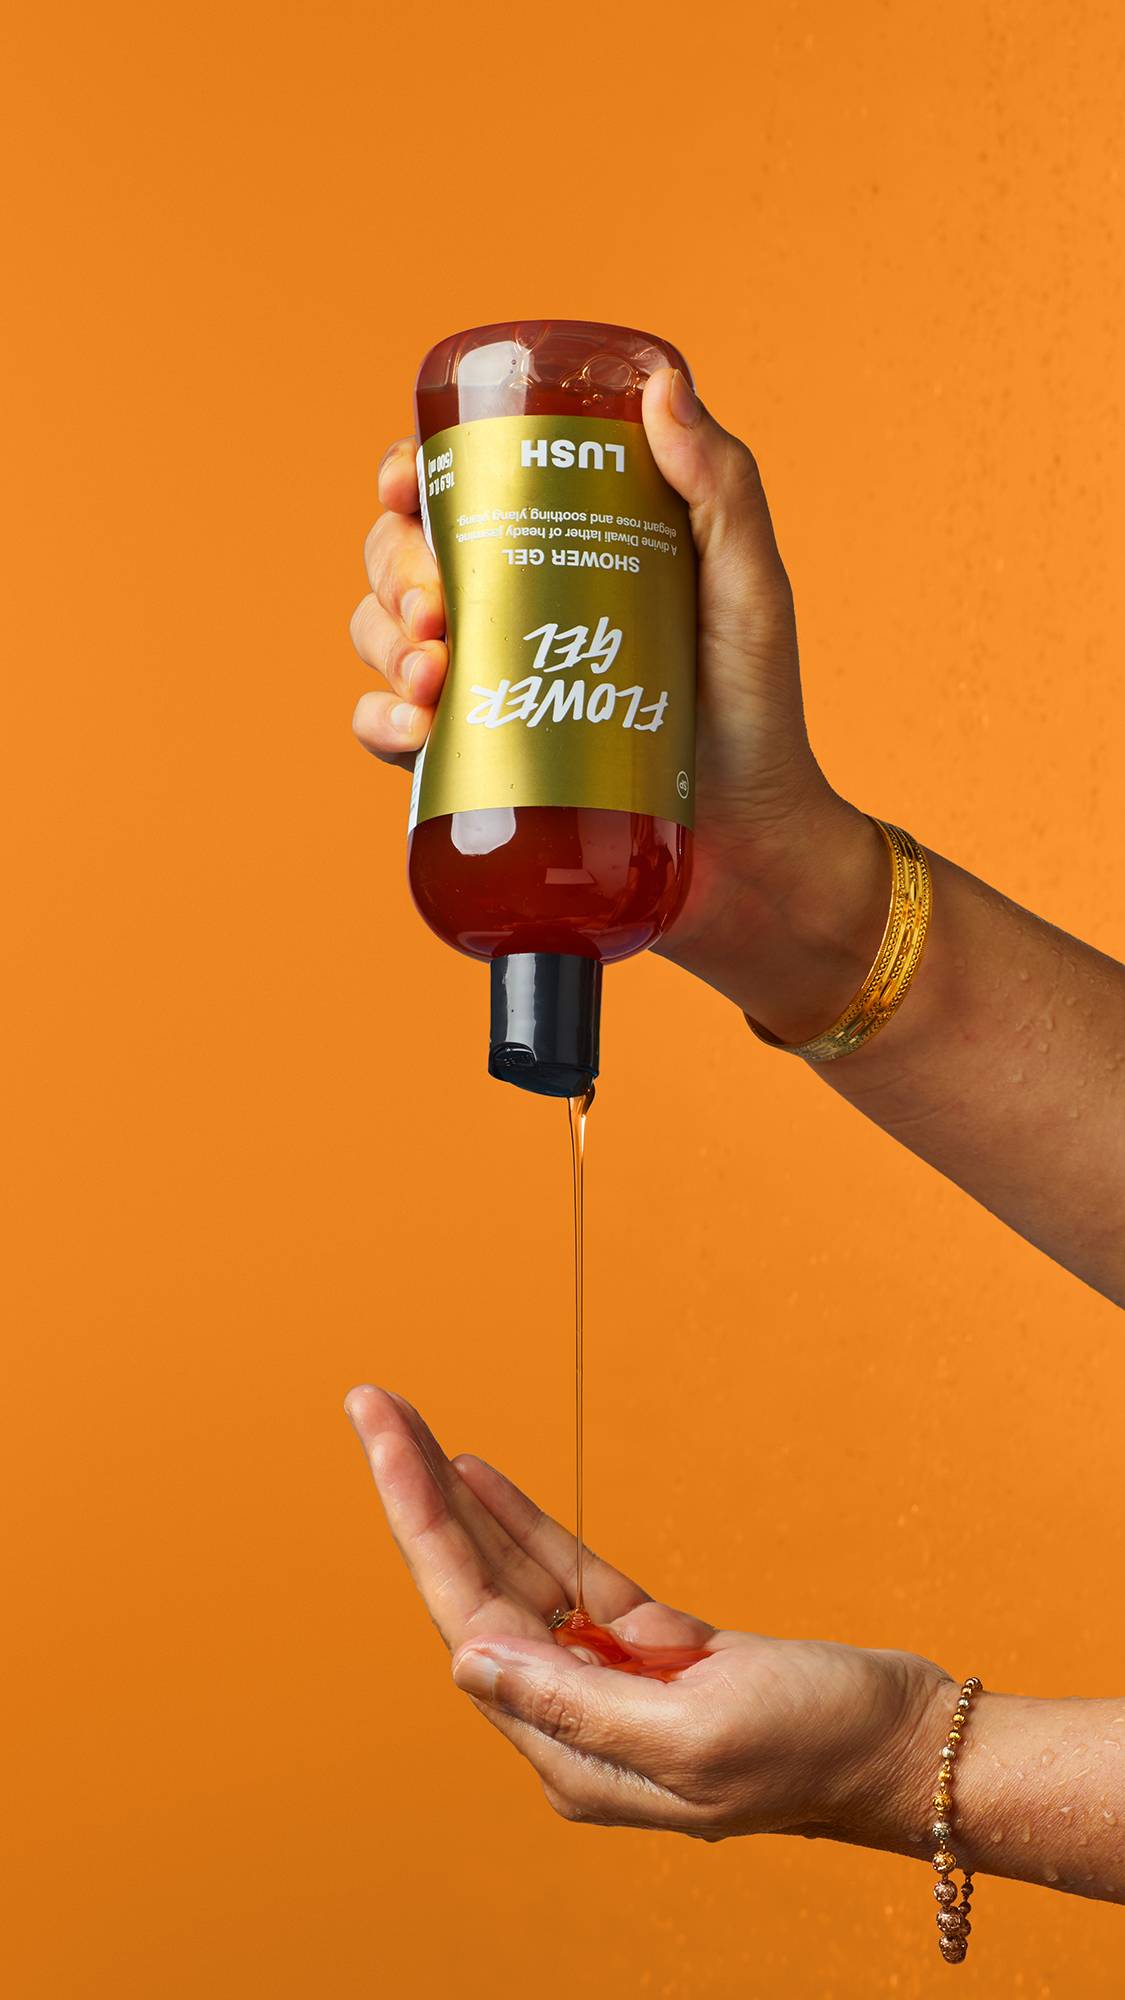 Image shows the model squeezing the Flower Gel shower gel out of the bottle into their hand on a bright orange backdrop.